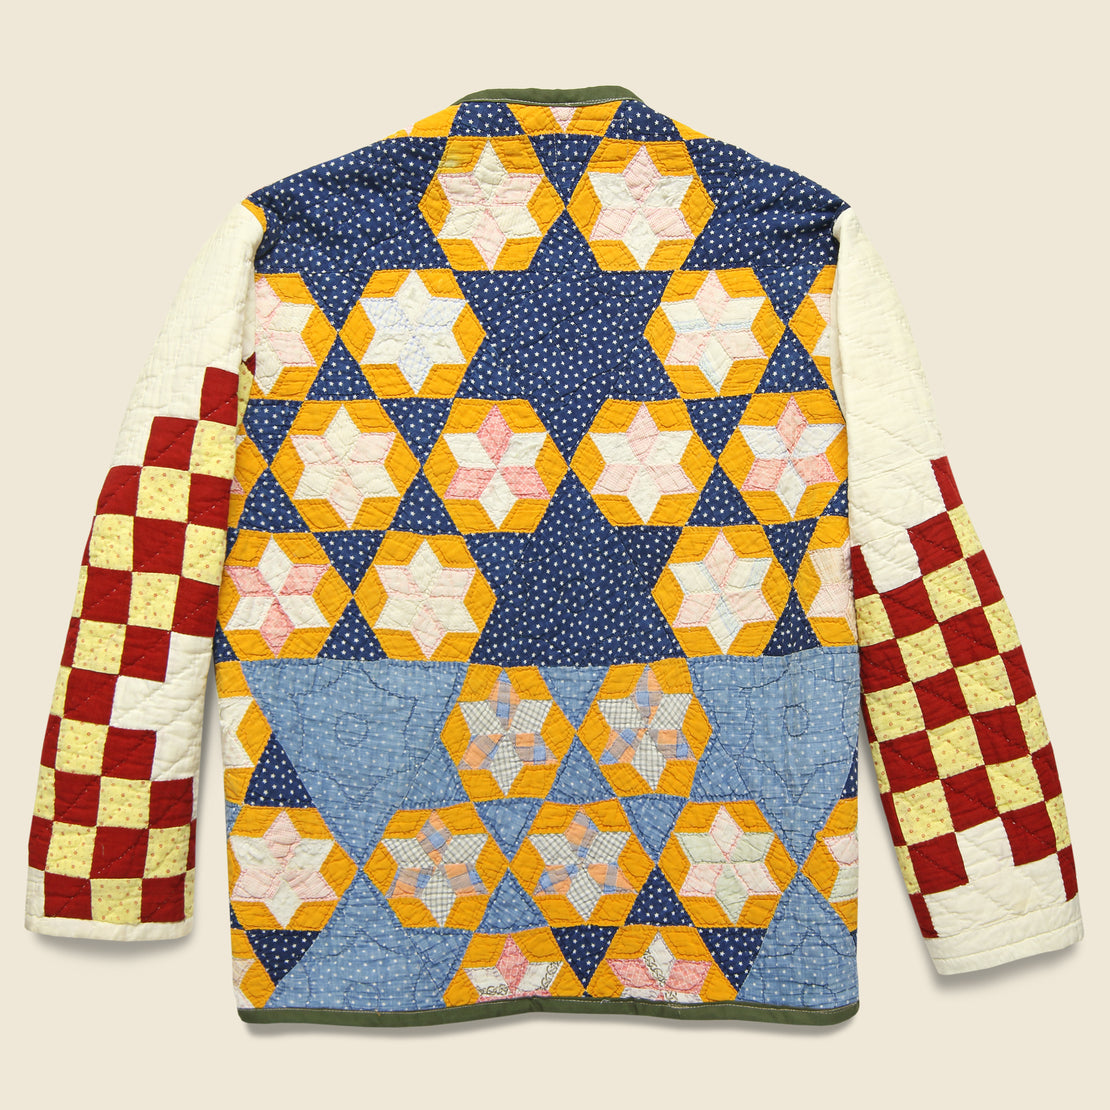 Scofield Hexagon Star Quilt Kimono - Navy/Yellow/Red - Vintage - STAG Provisions - W - One & Done - Apparel